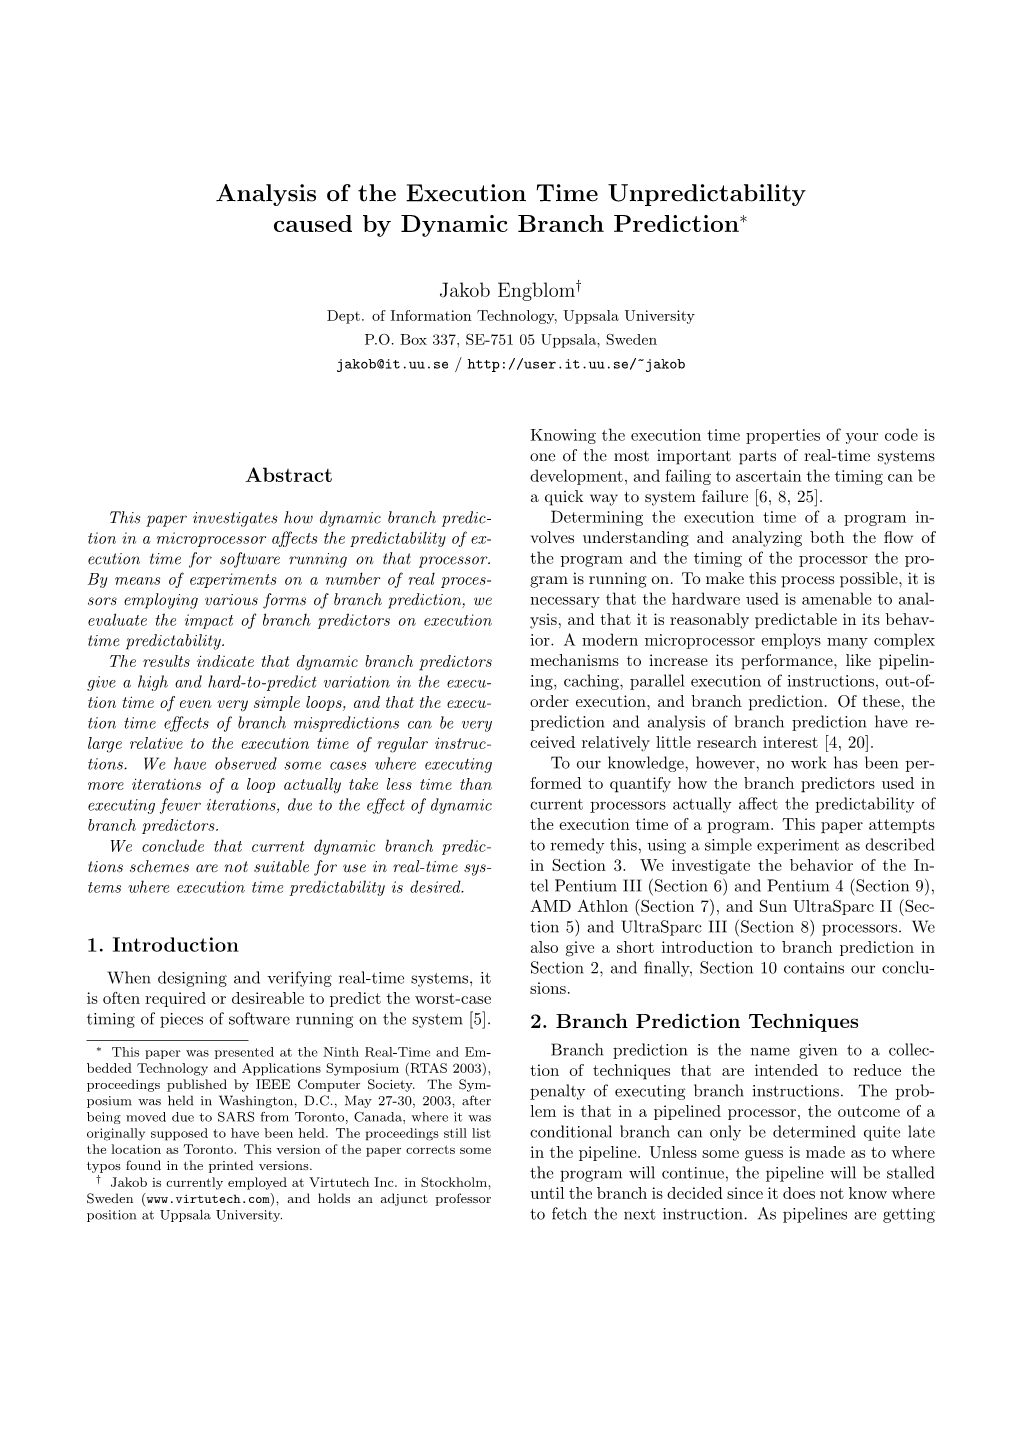 Analysis of the Execution Time Unpredictability Caused by Dynamic Branch Prediction∗